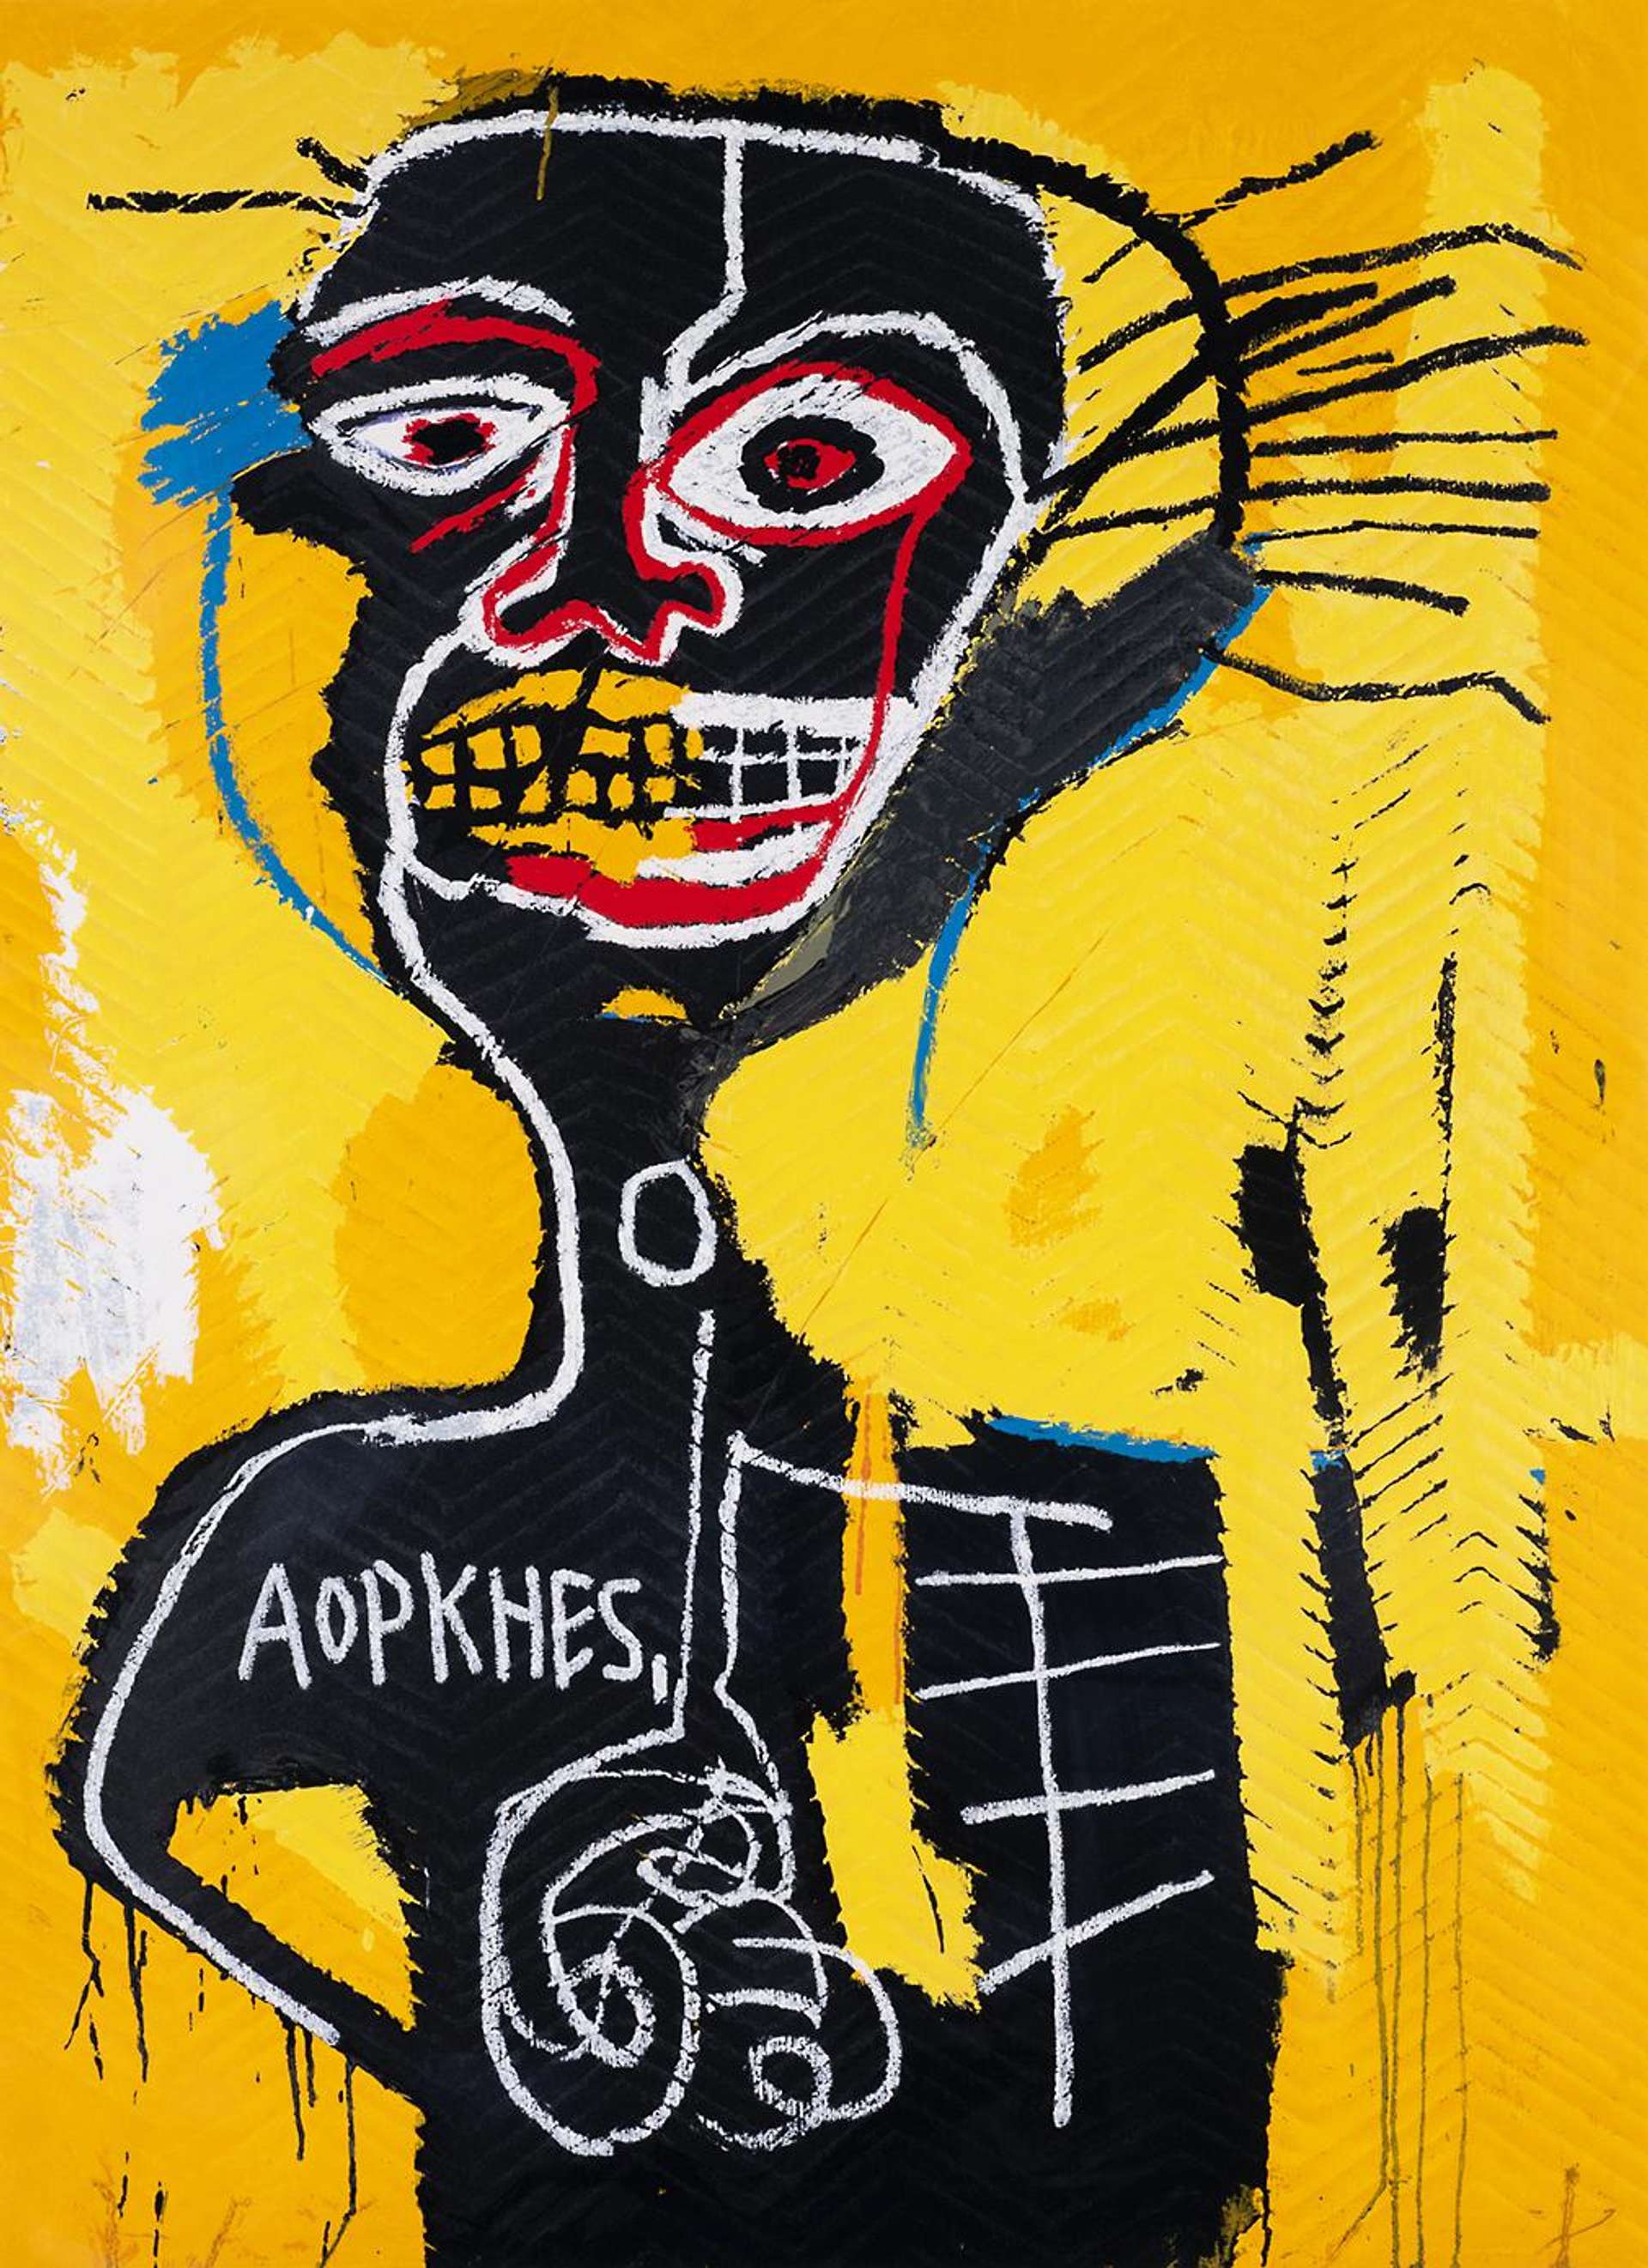 An image of the painting Cabeza by Jean-Michel Basquiat. It shows a black and colourful human figure against a yellow background.